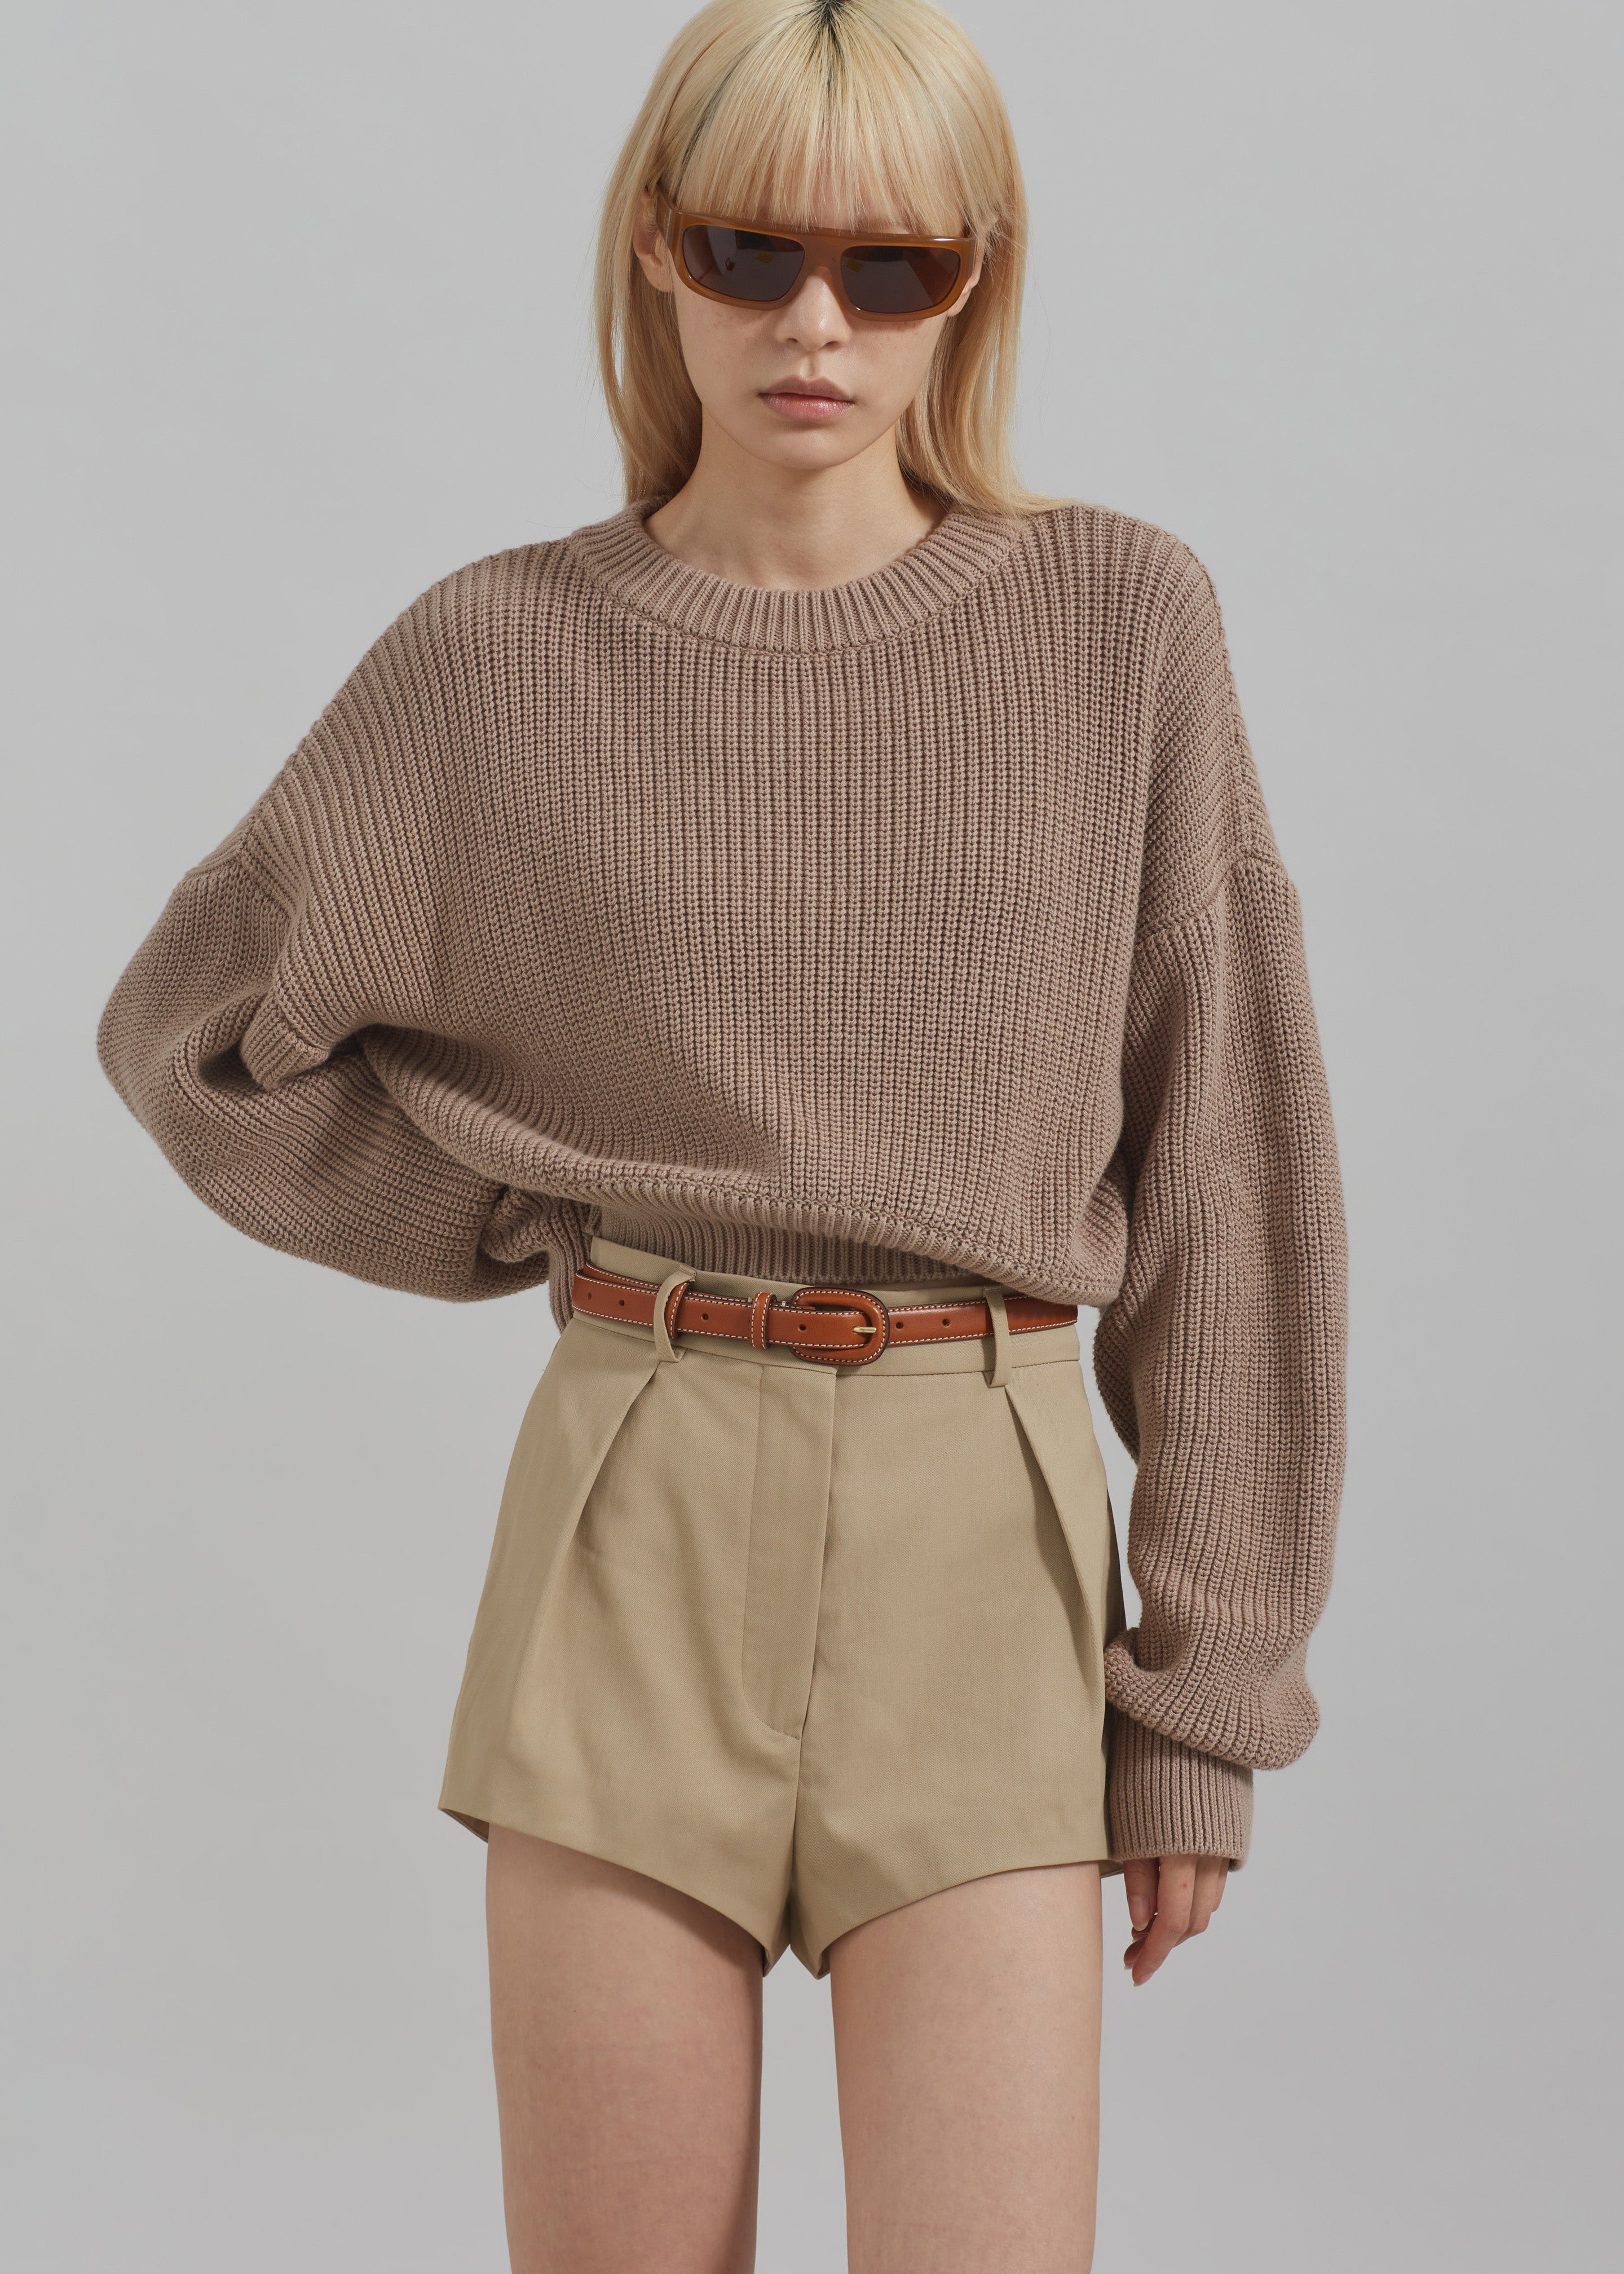 Teague Cropped Sweater - Beige - 6